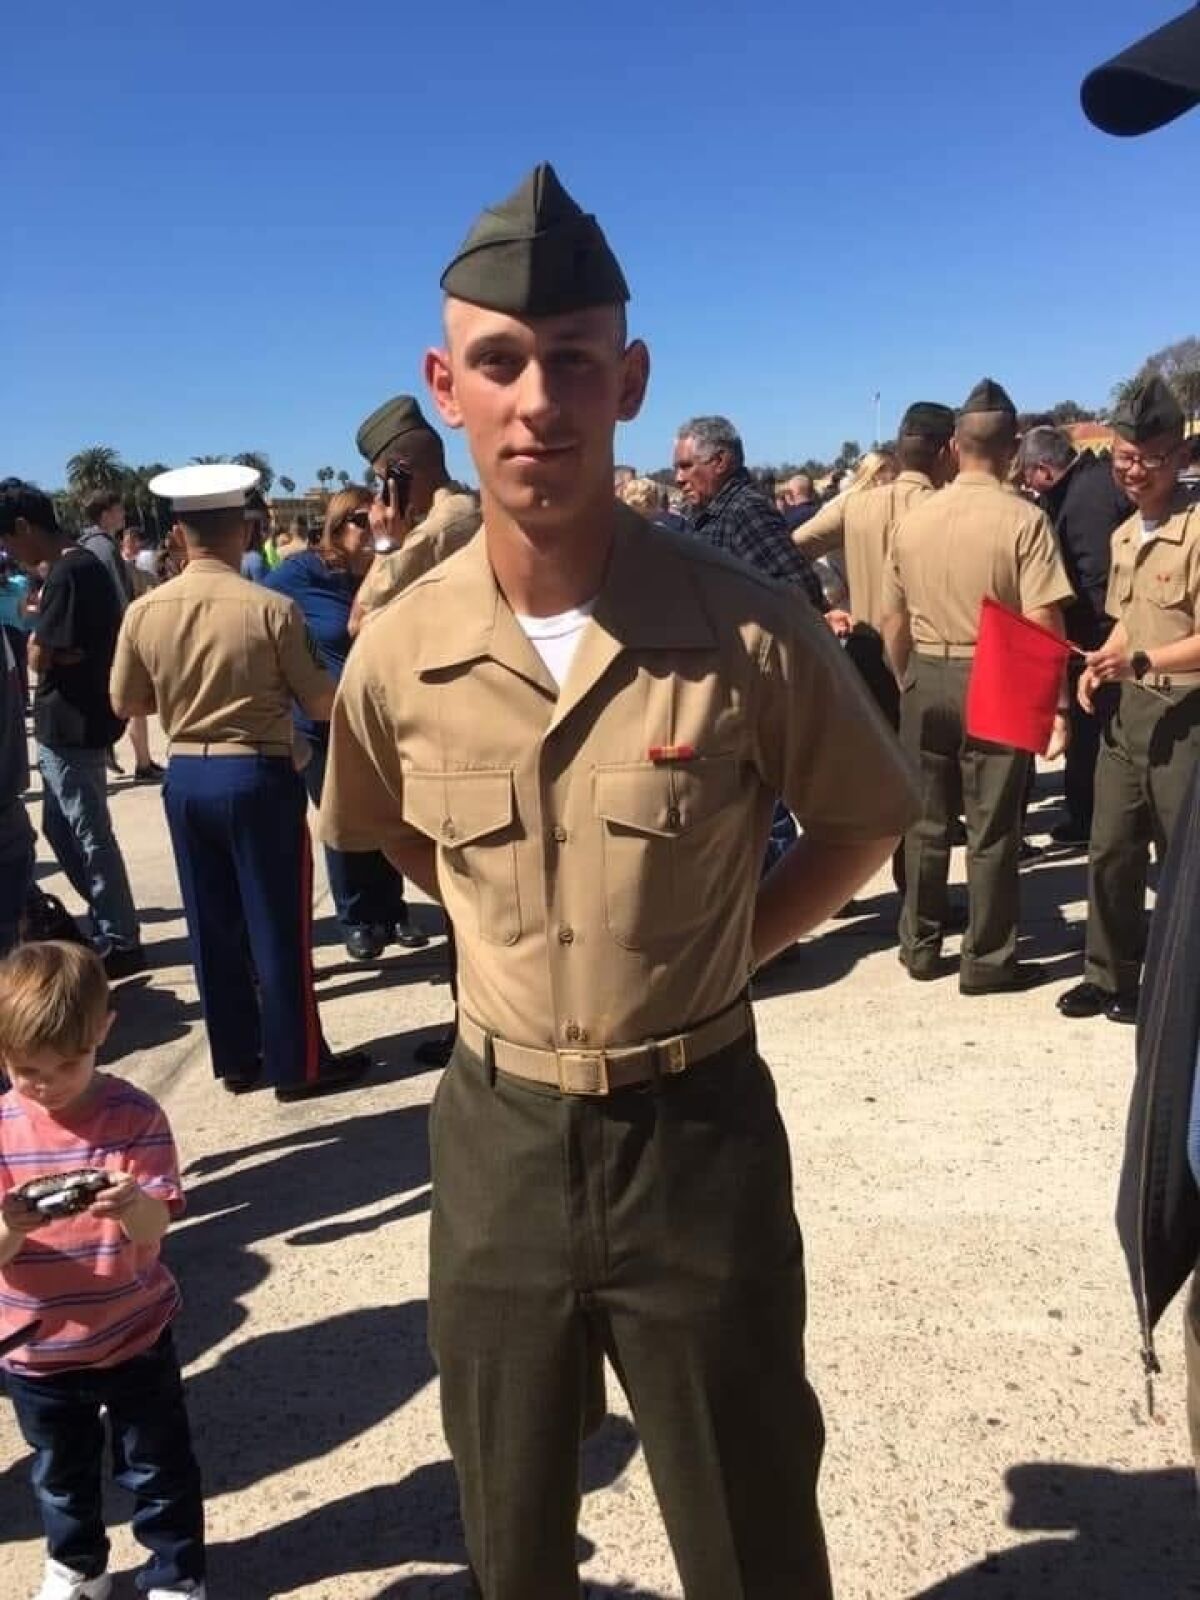 Lance Cpl. Chase Sherwood, then holding the rank of private, at San Diego Marine Corps Recruit Depot graduation, April 2019.